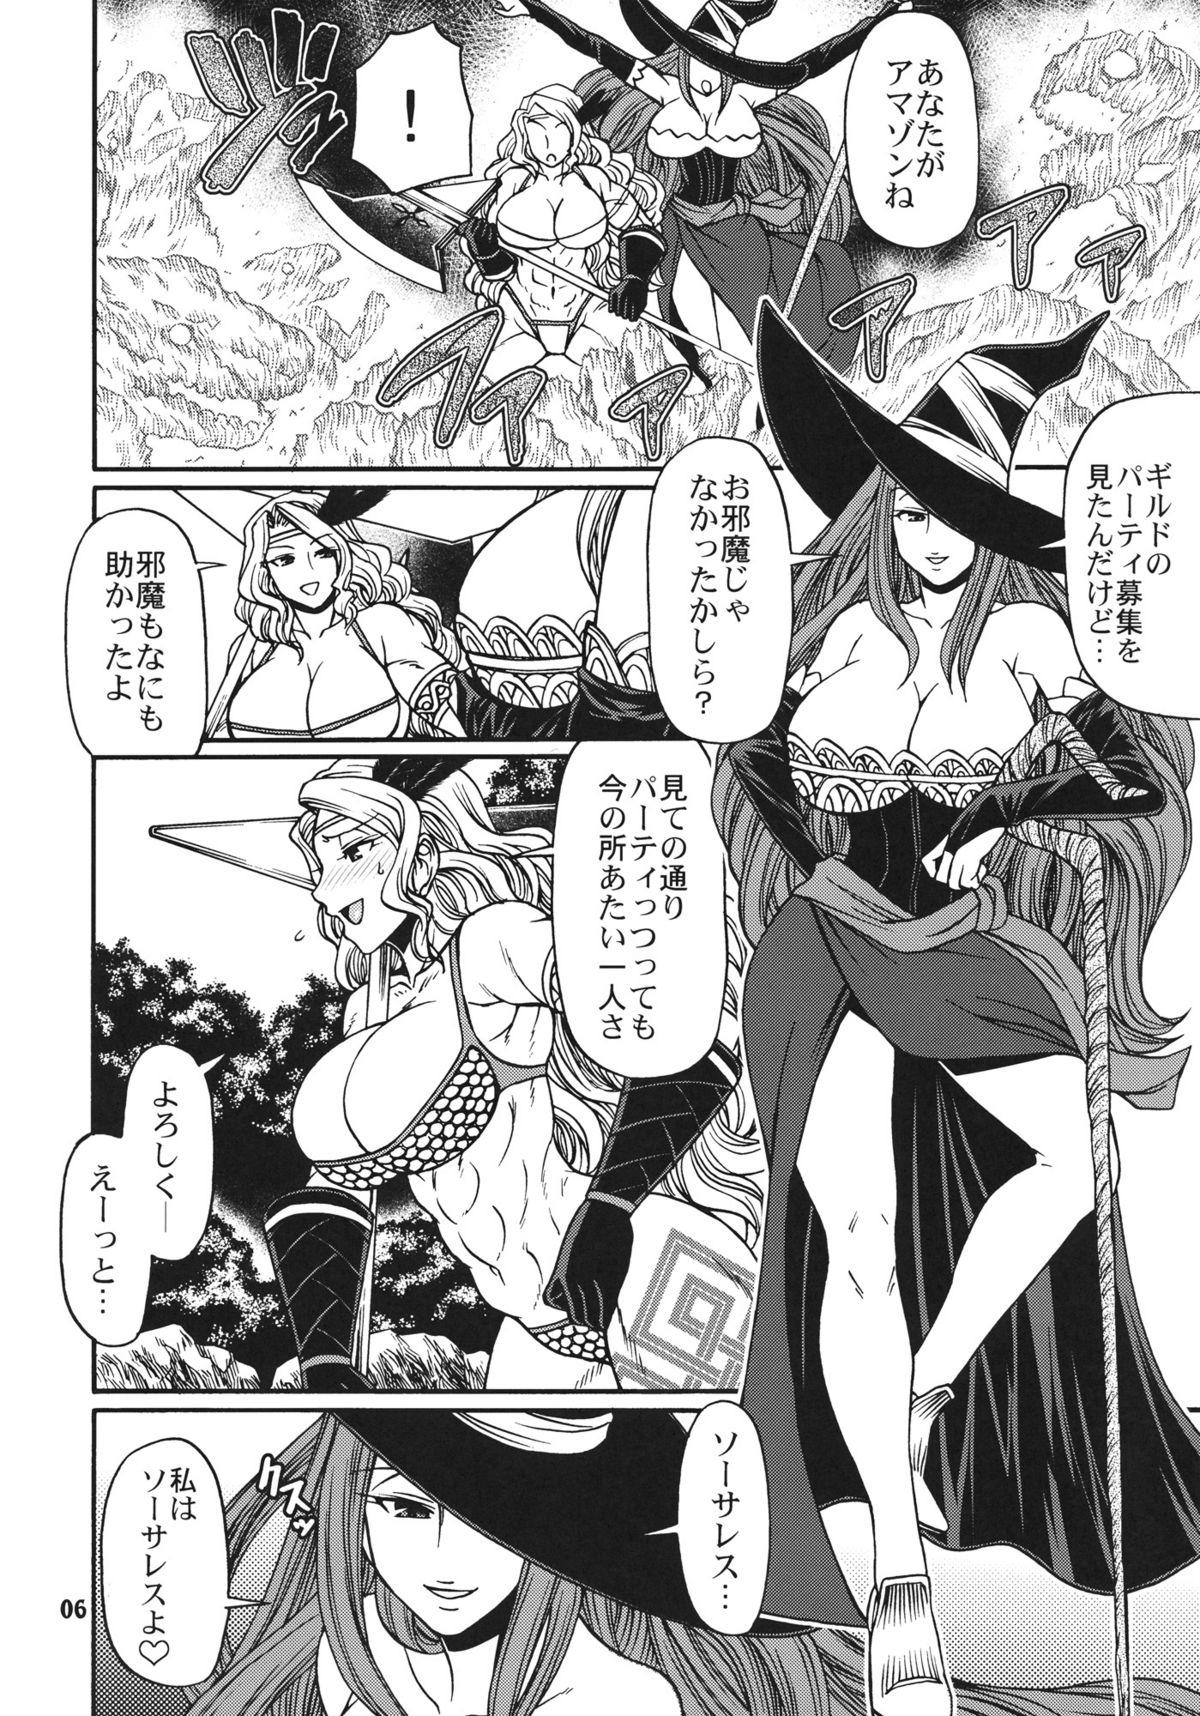 Whore PARTY HARD - Dragons crown Bbc - Page 5